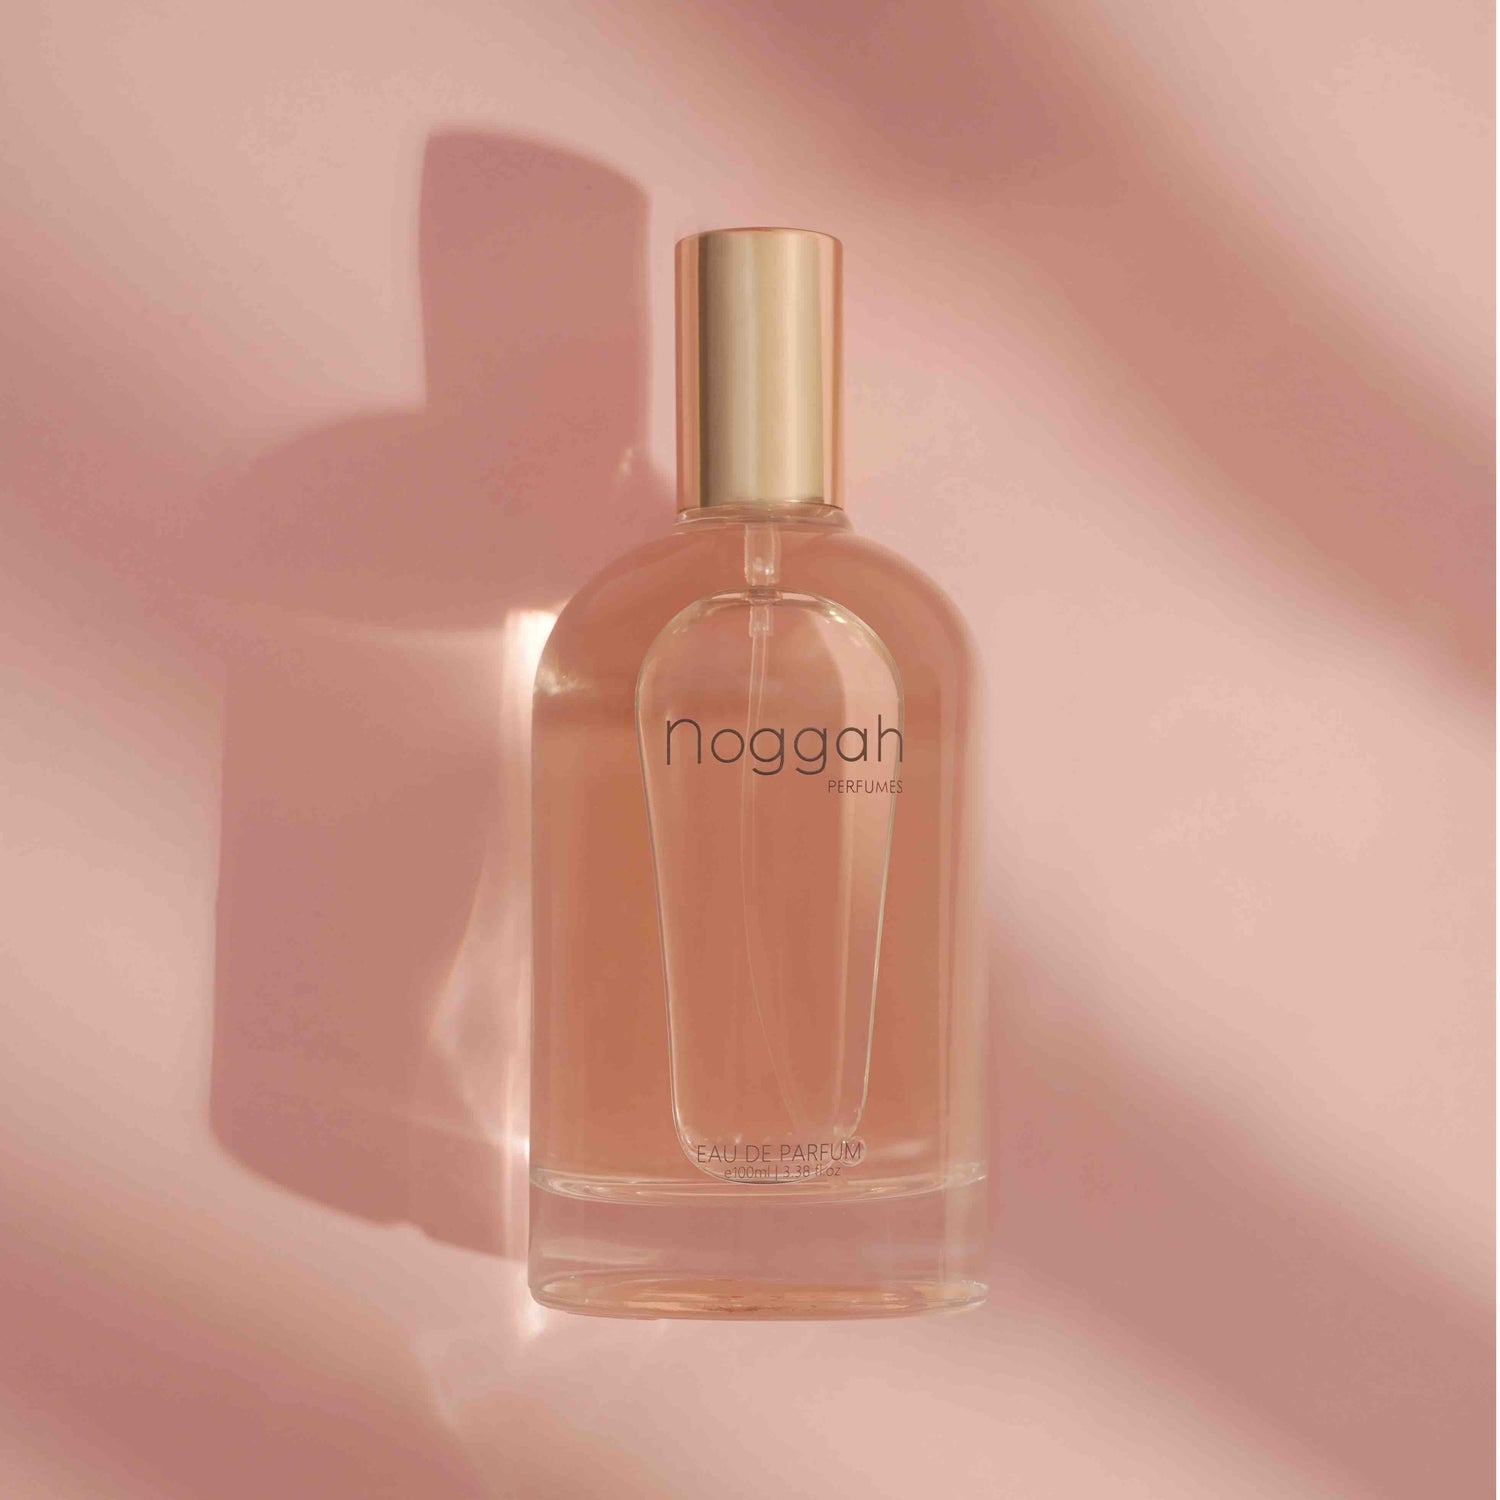 Noggah Perfumes is a luxury perfume brand that represents the